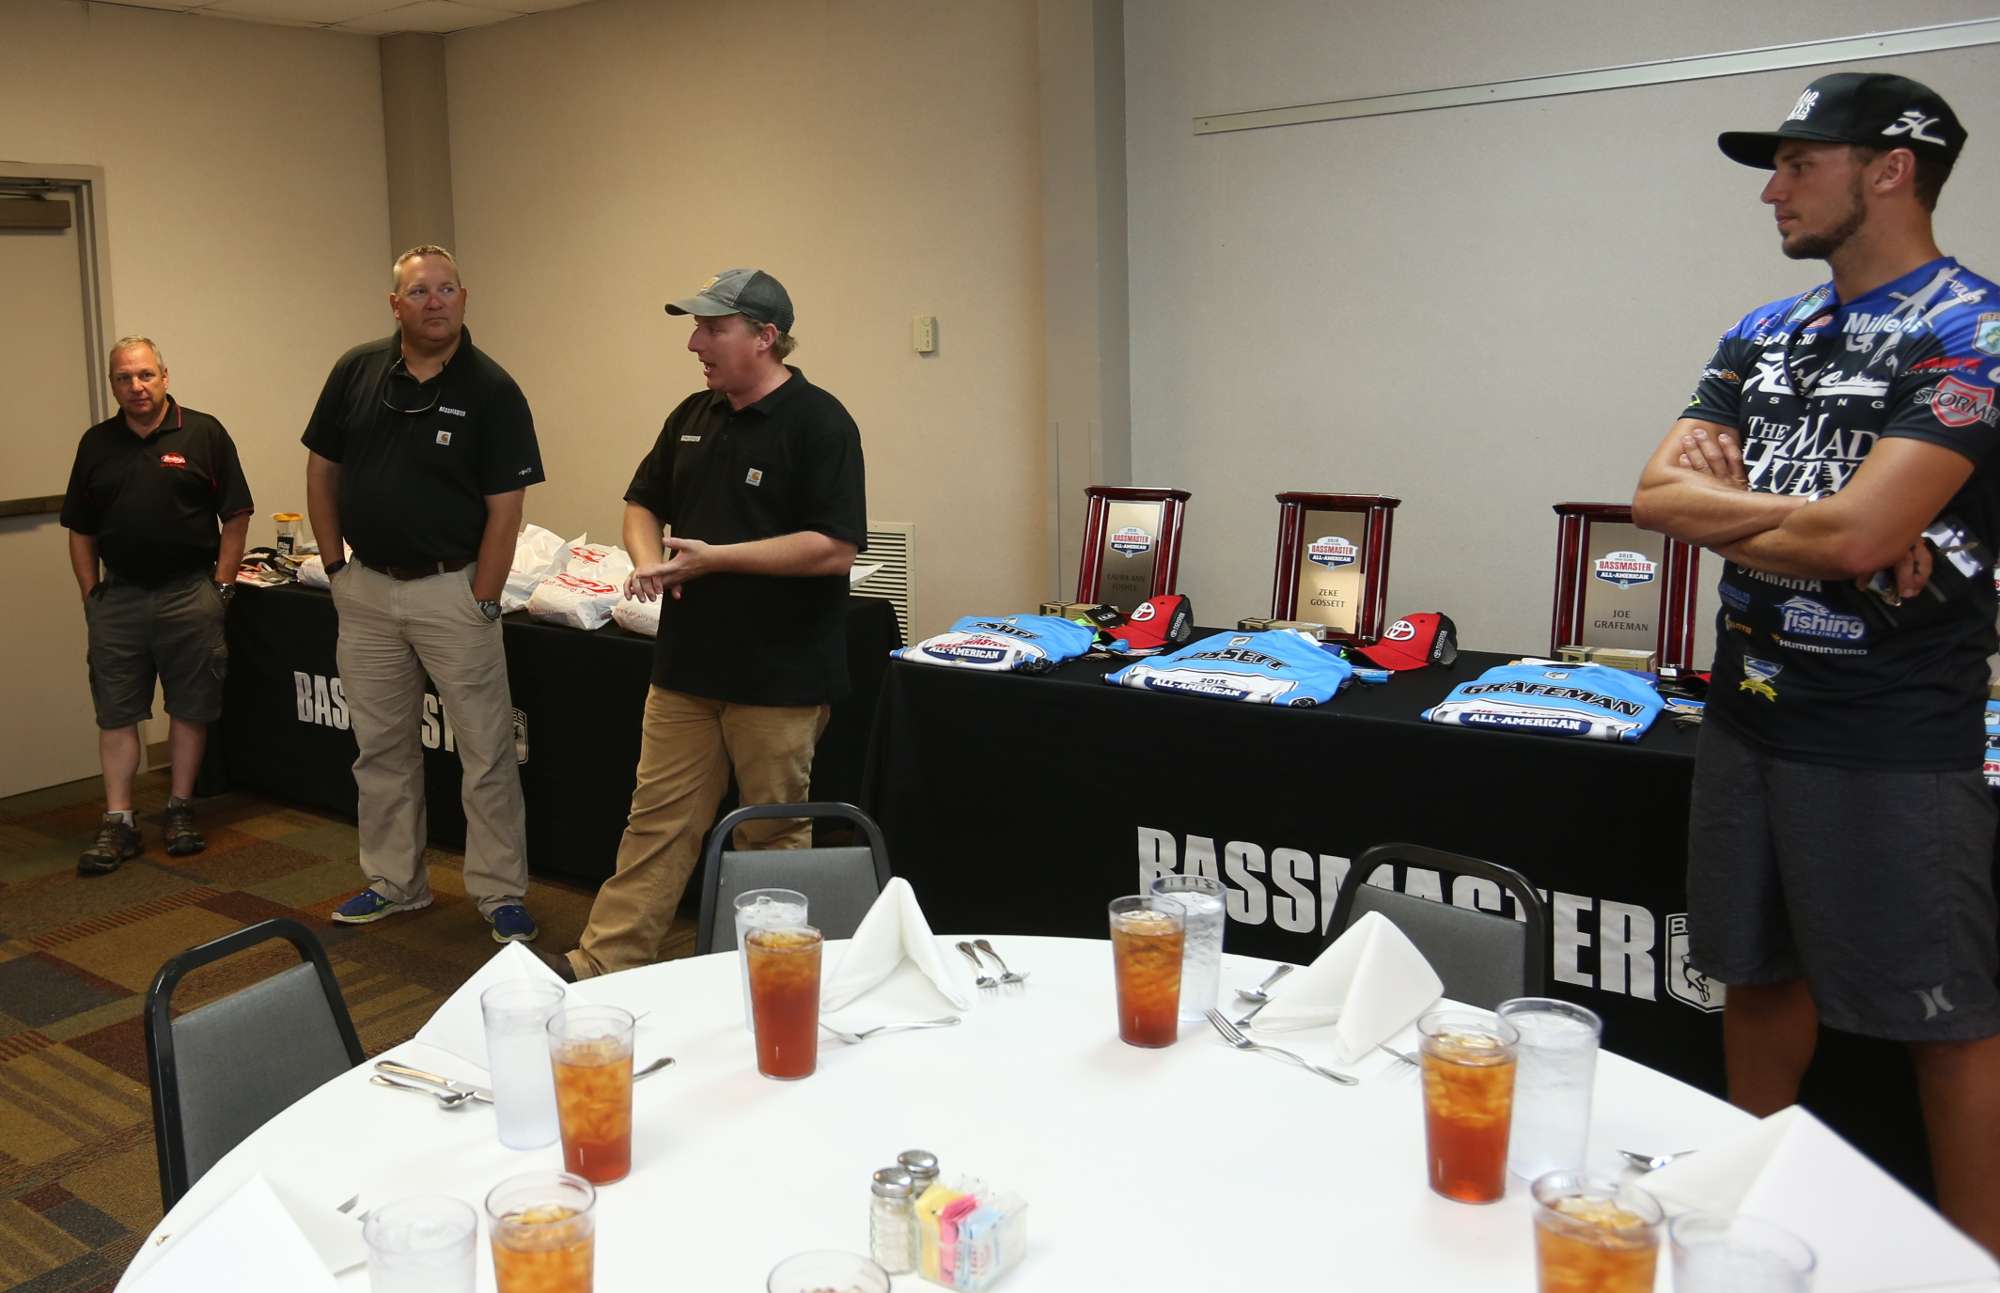 Hank Weldon, B.A.S.S. youth manager, thanked the pros for volunteering their time to spend with the young anglers.